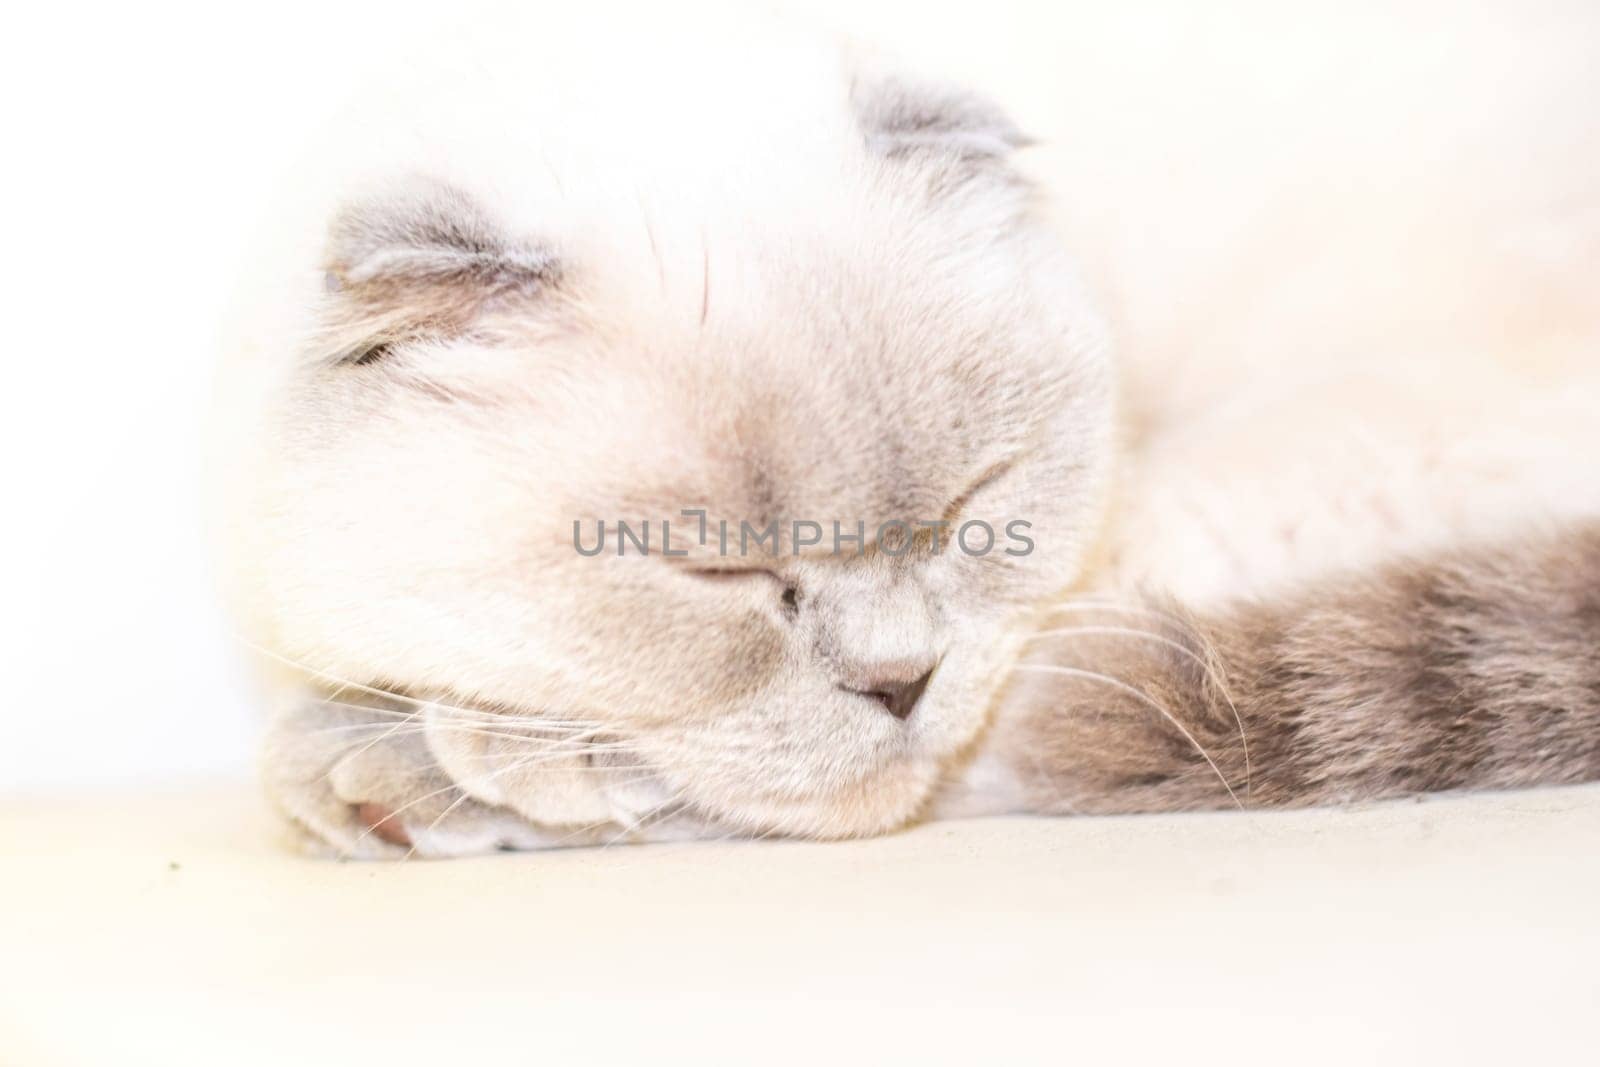 A cat is sleeping on a white couch. The cat is white and has a gray face. The cat is curled up and he is very relaxed